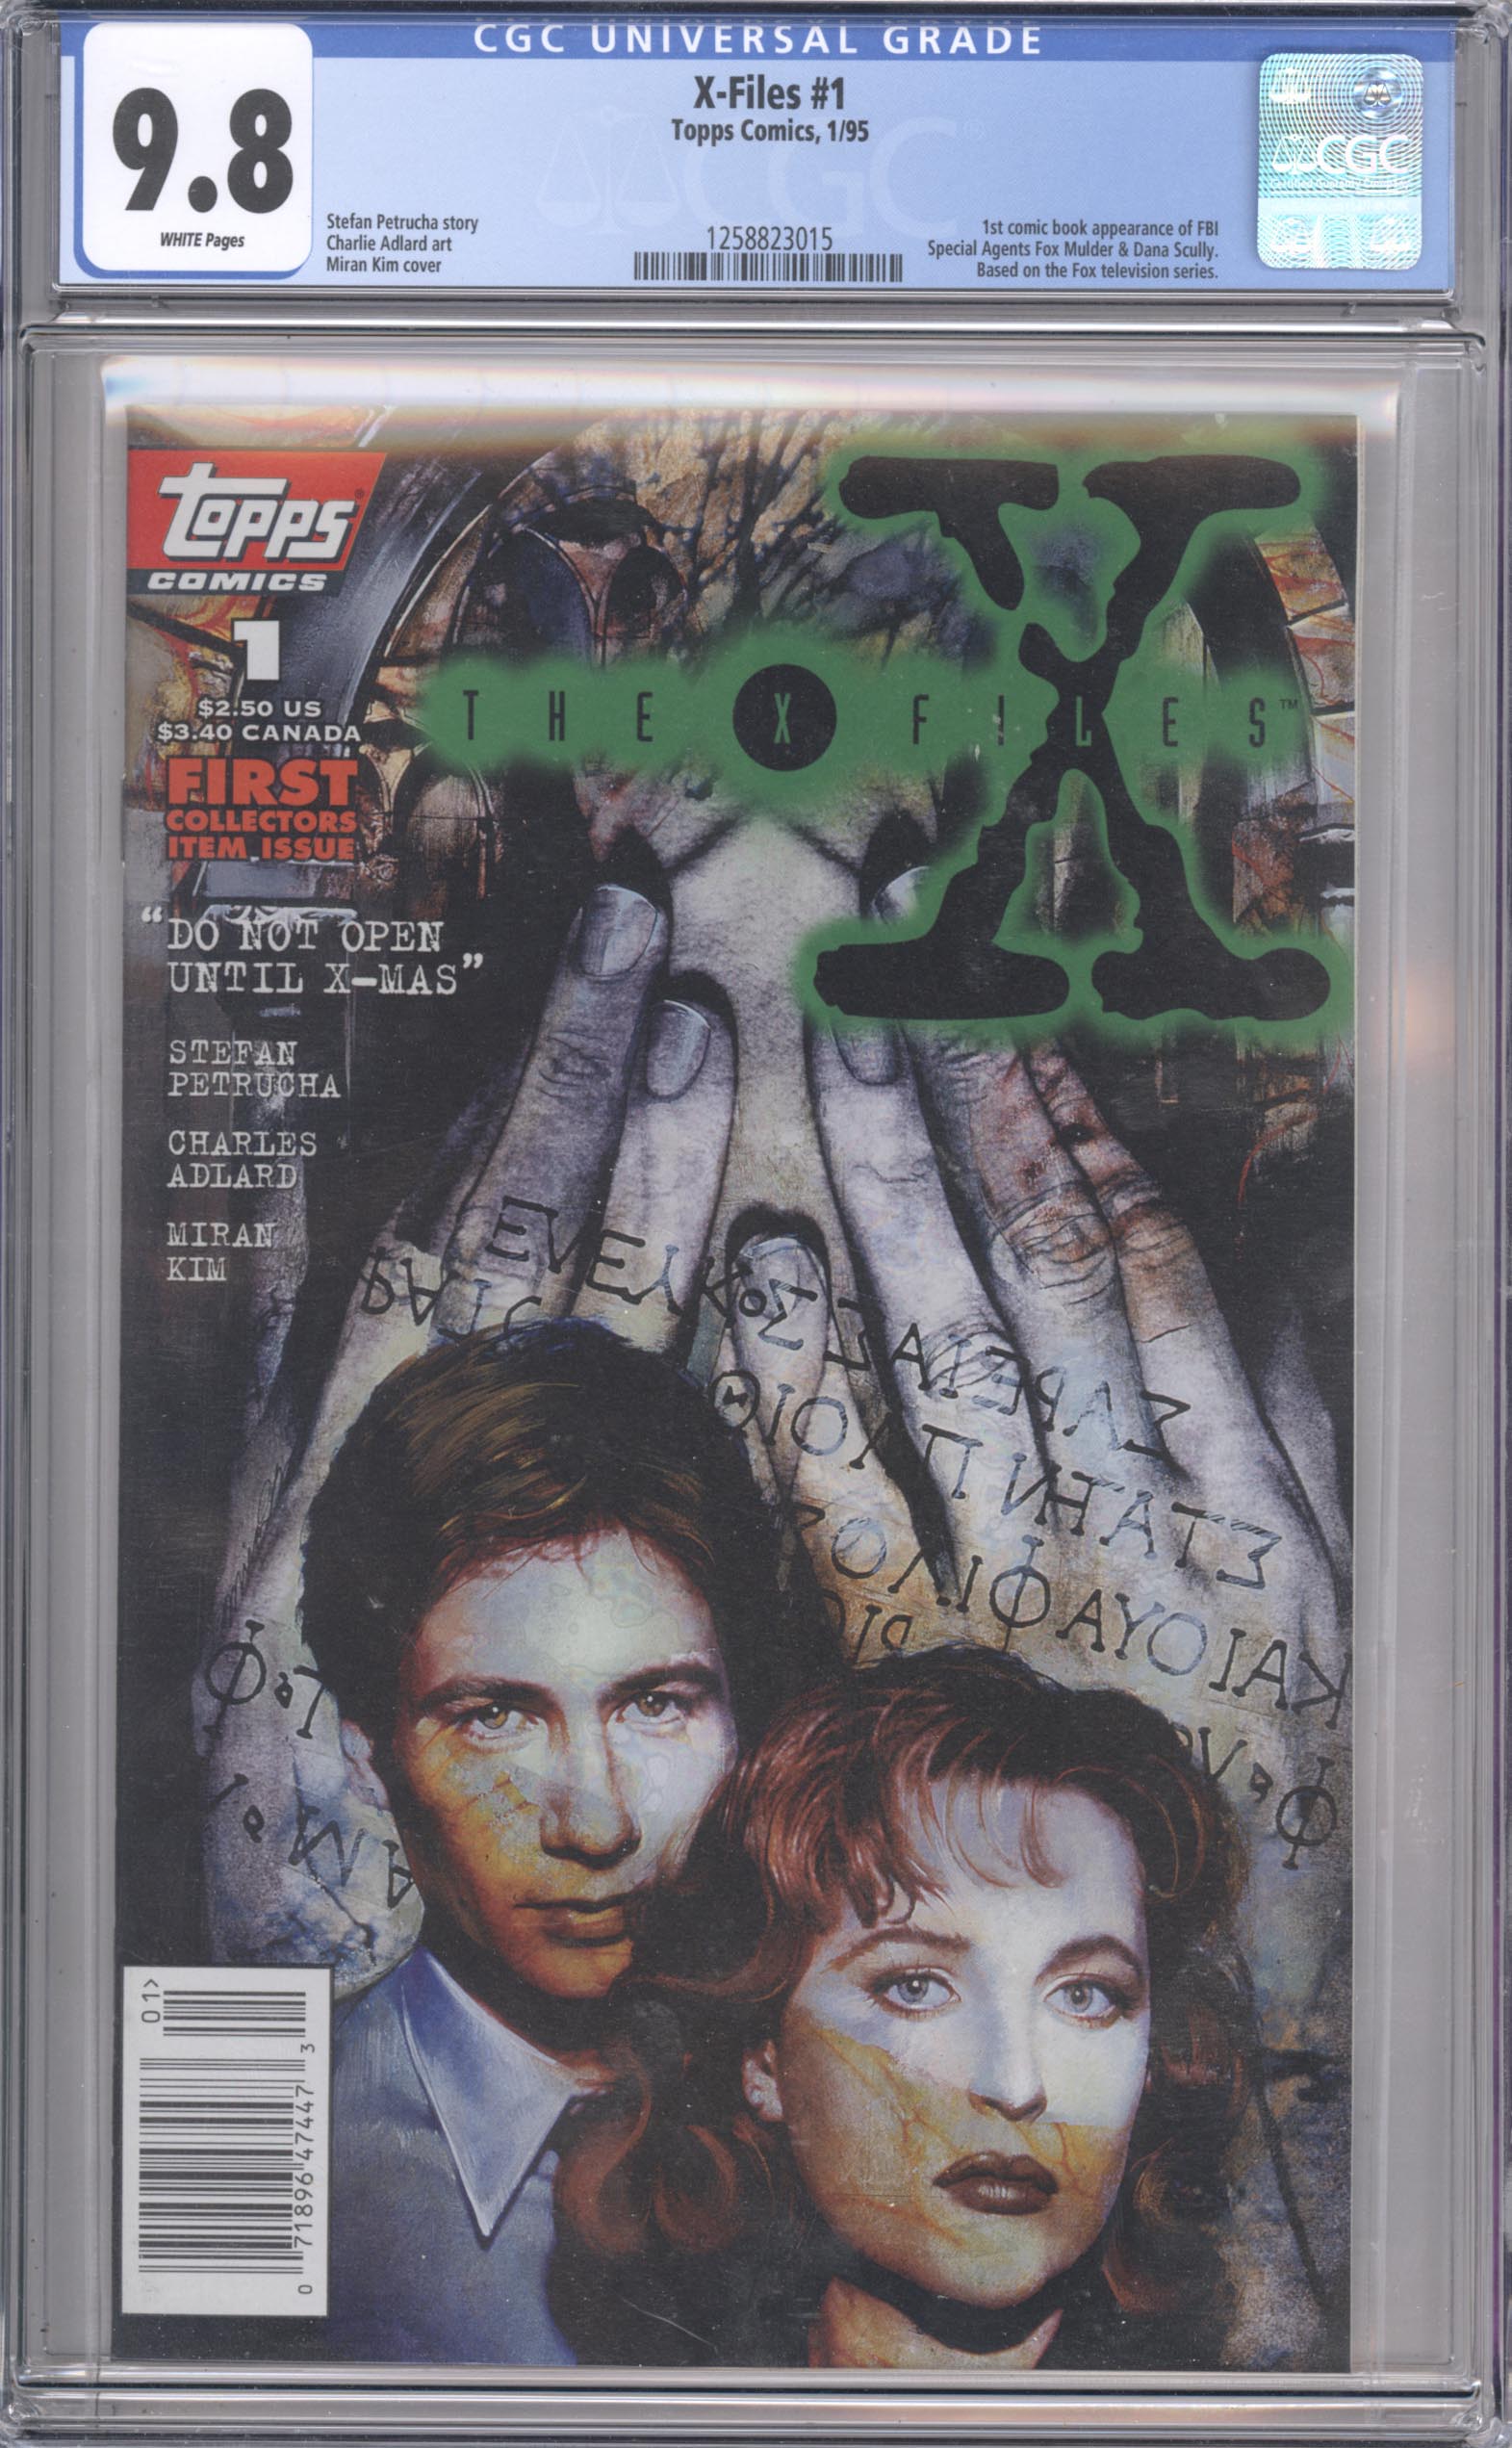 X-Files #1 front